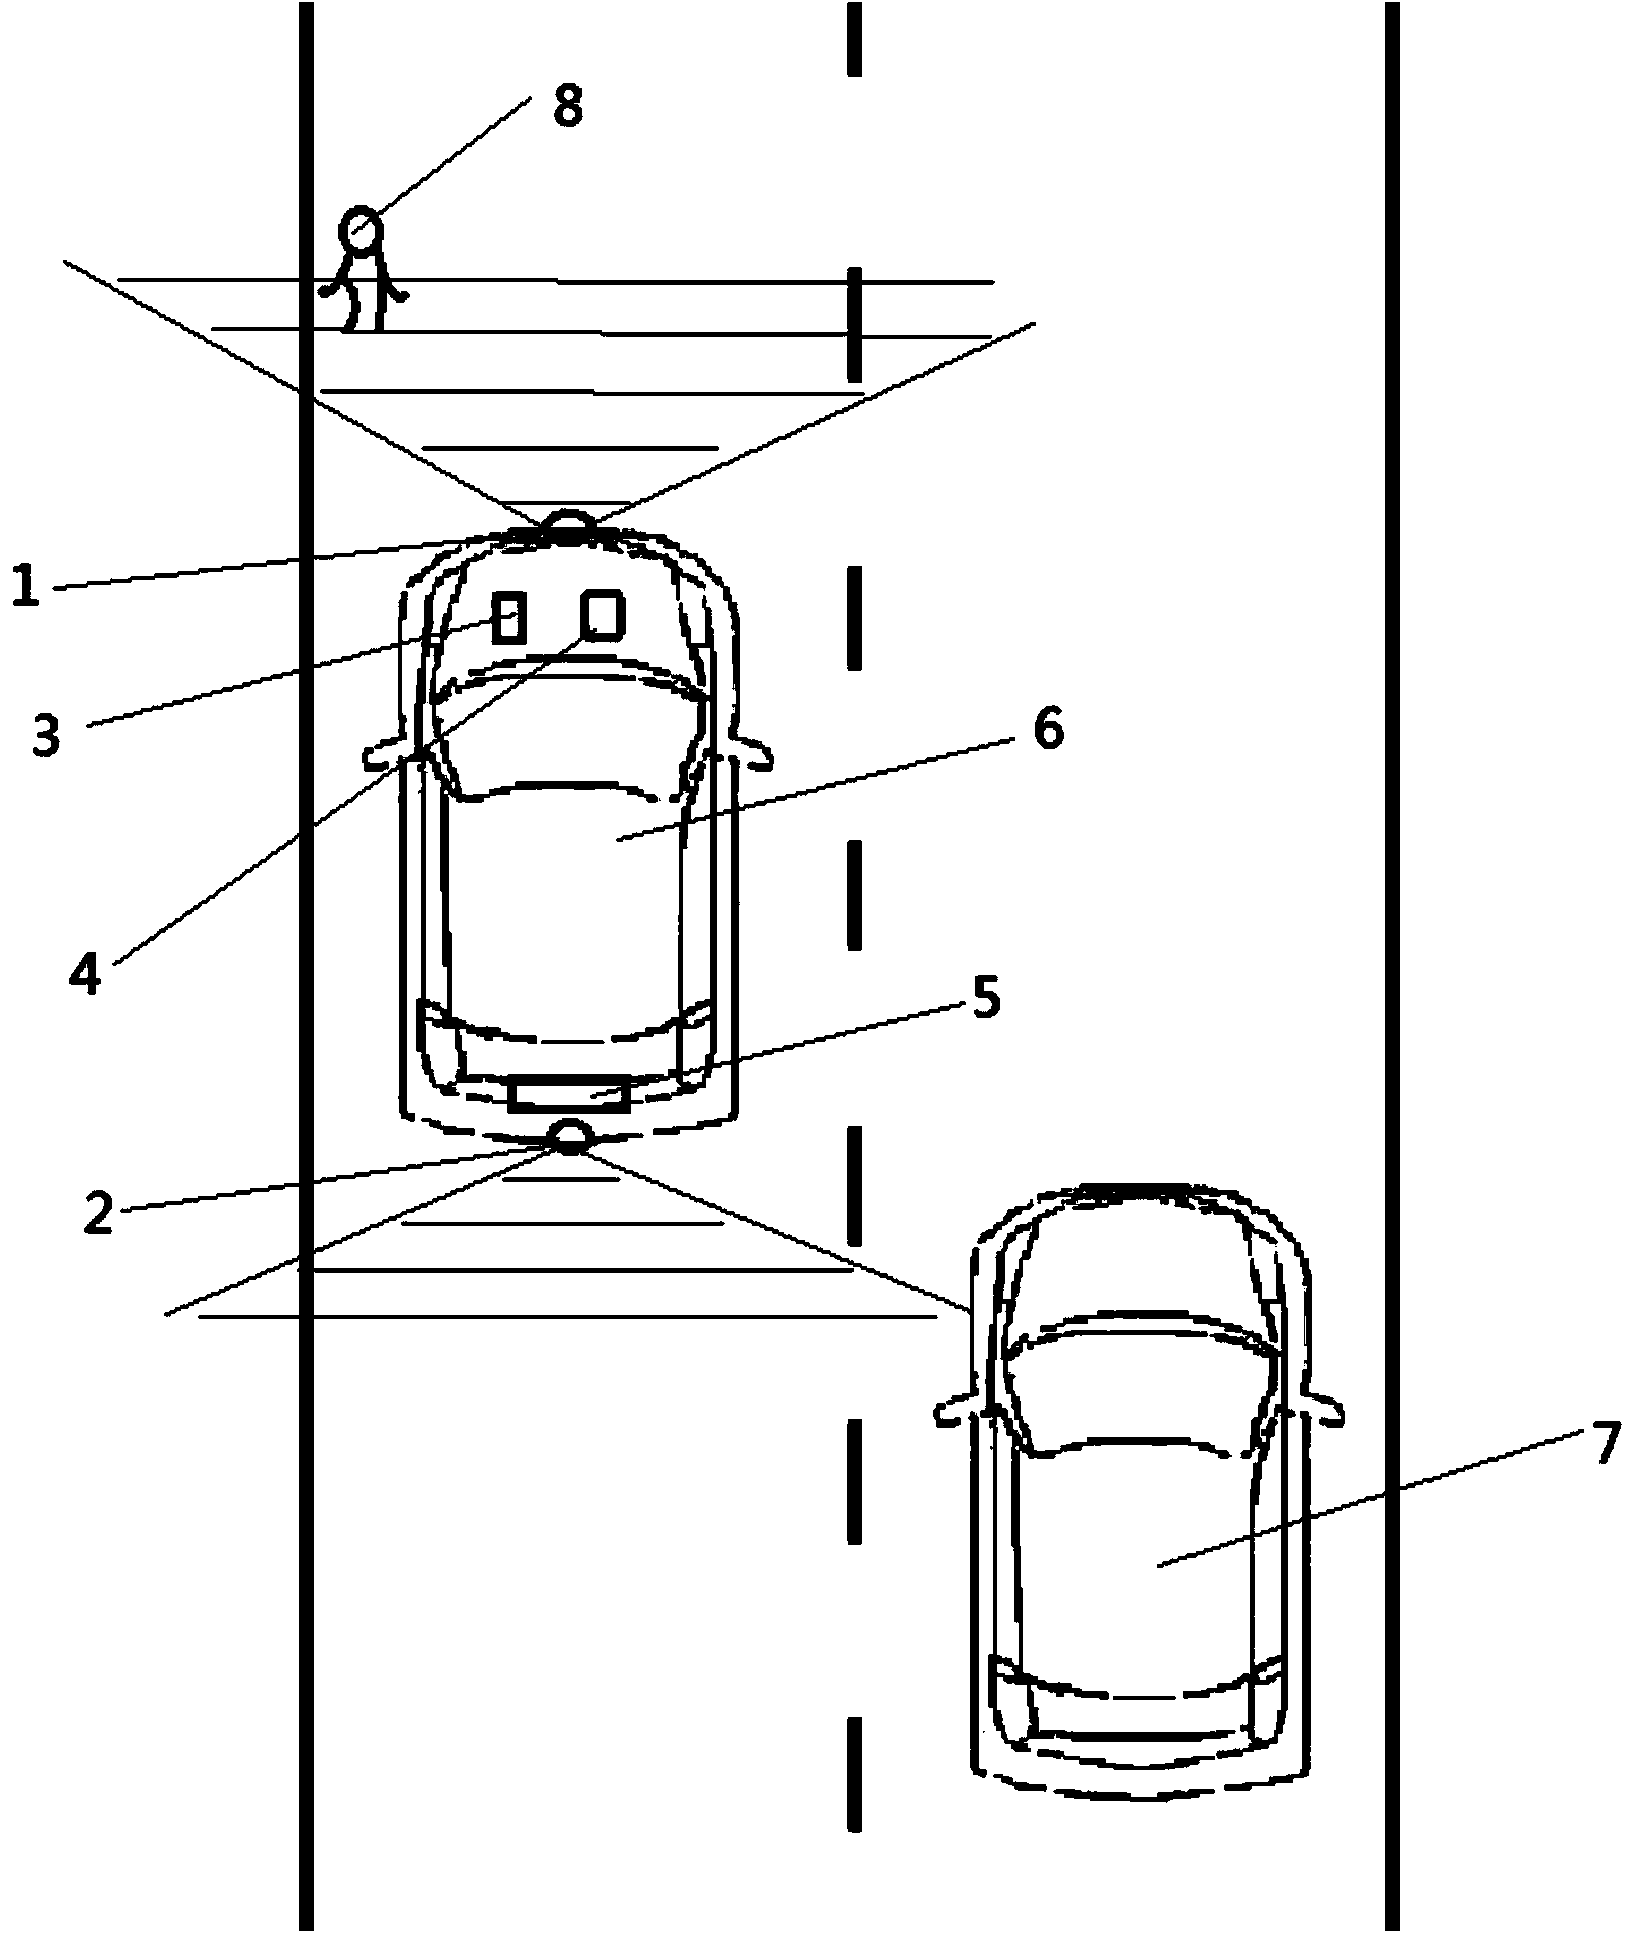 Vehicle-mounted device and method for sharing pedestrian emergence information